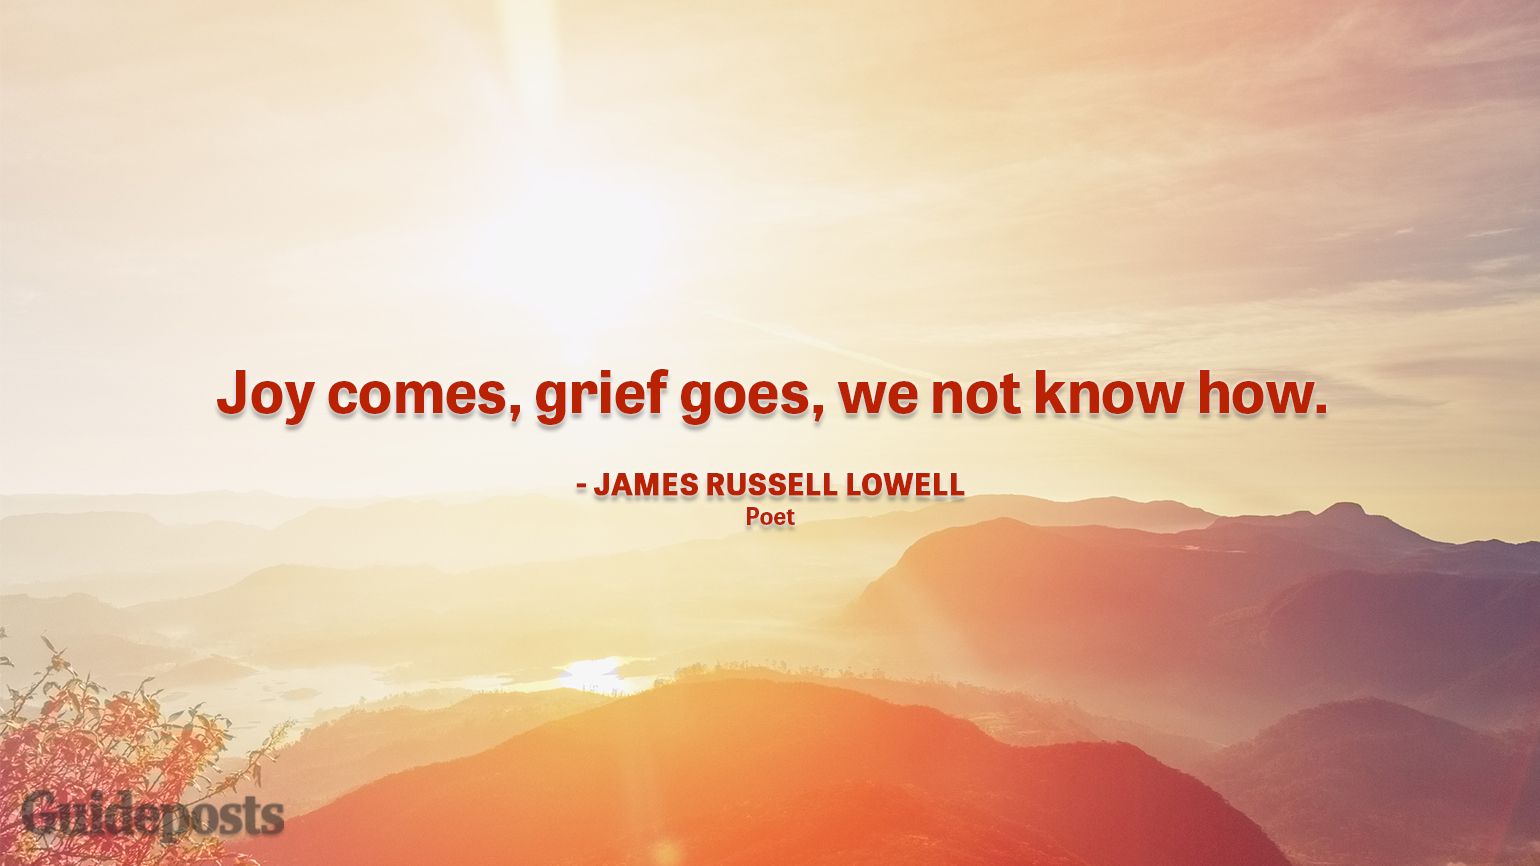 Uplifting Quotes to Cope with Grief "Joy comes, grief goes, we not know how." — James Russell Lowell, Poet better living life advice